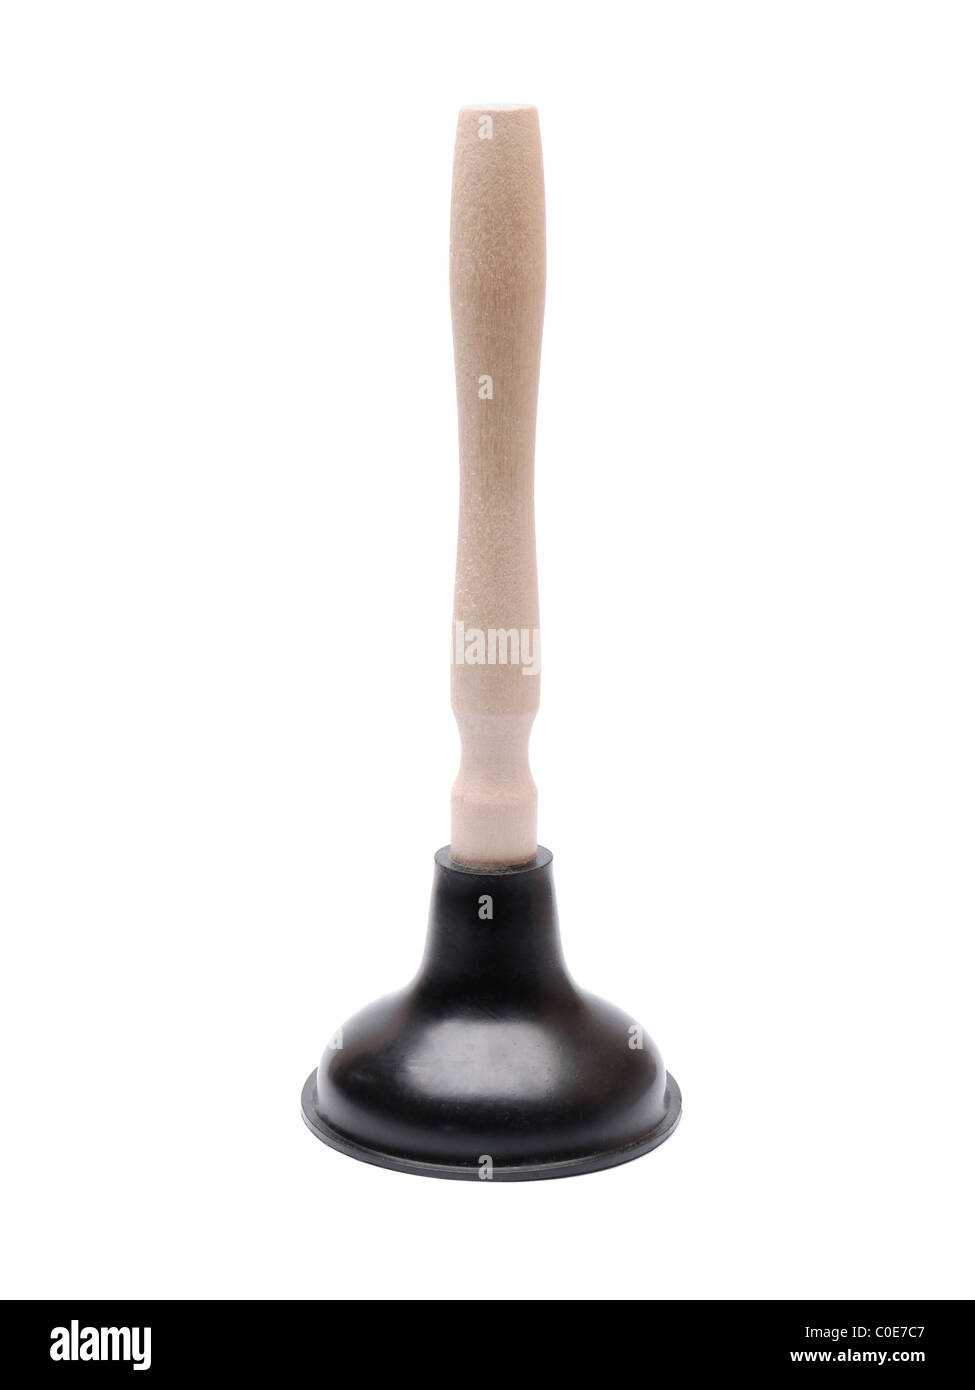 Rubber plunger shot over white background Stock Photo